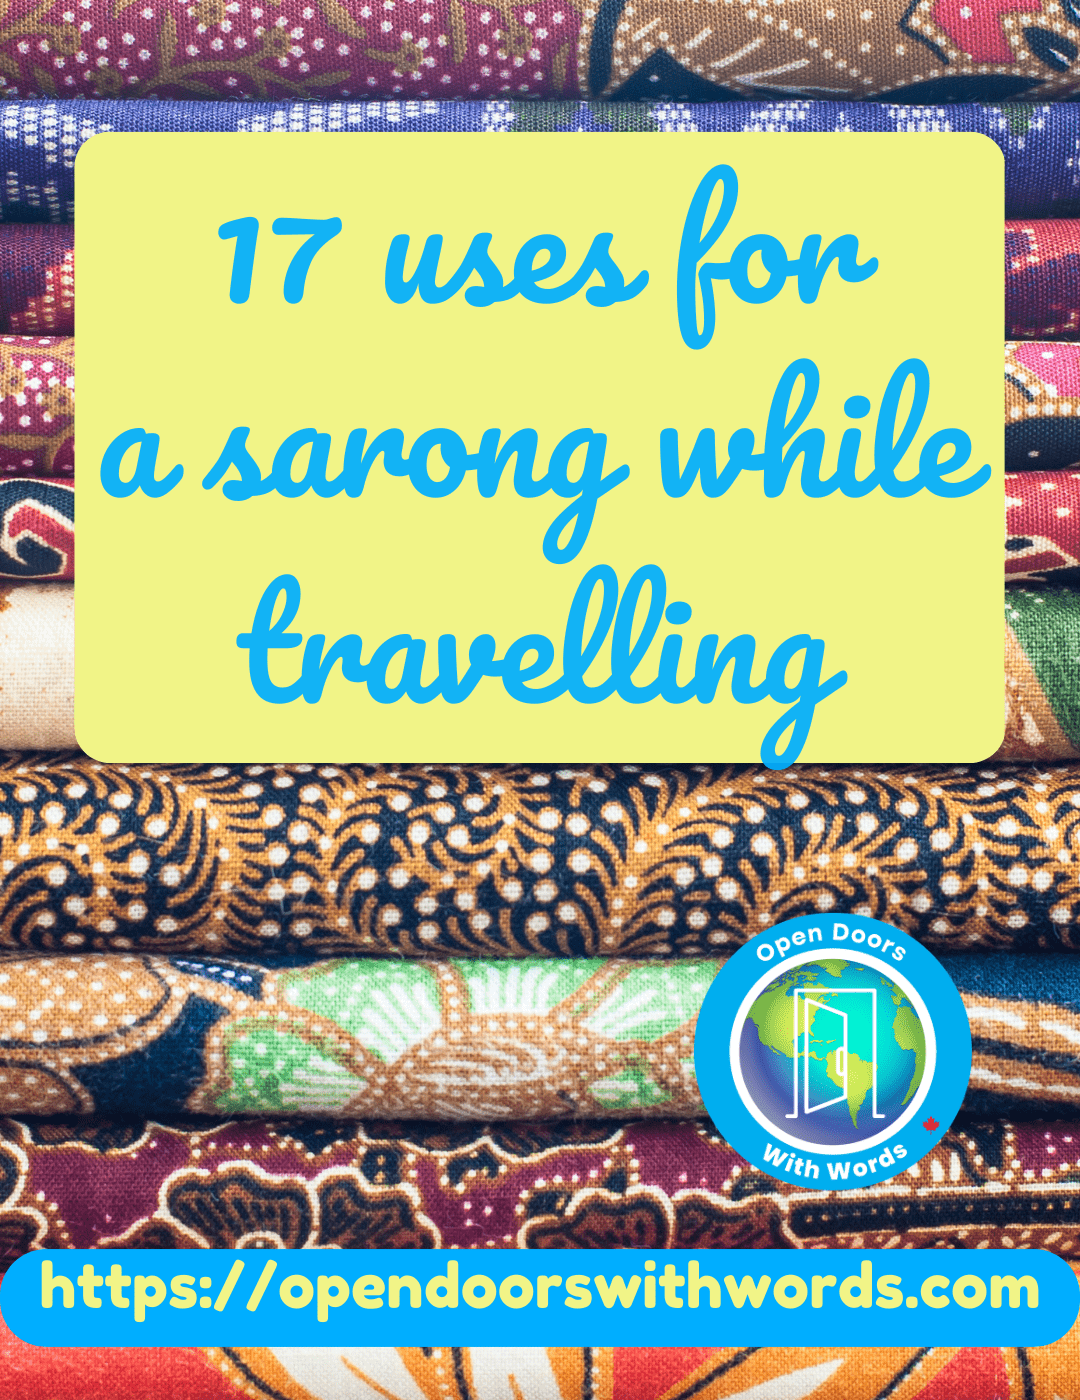 17 Uses for a Sarong While Travelling